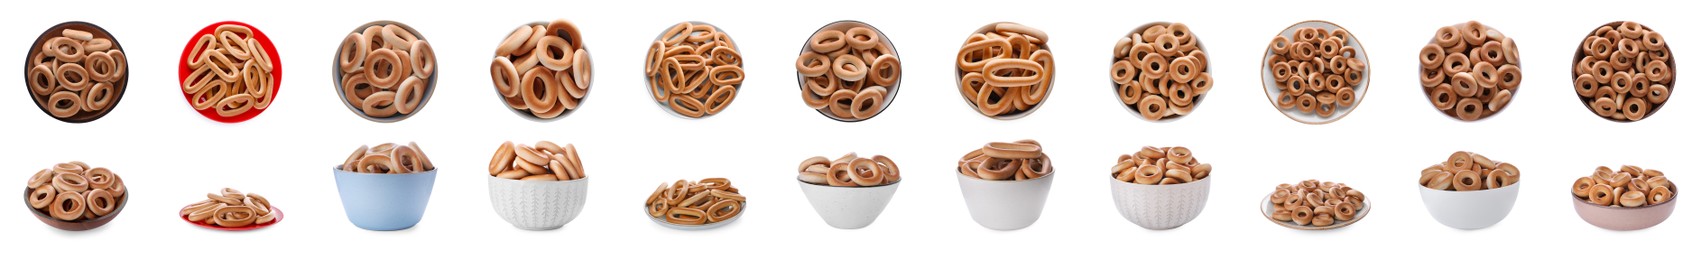 Collage with delicious Sushki (dry bagels) on white background, side and top views. Banner design